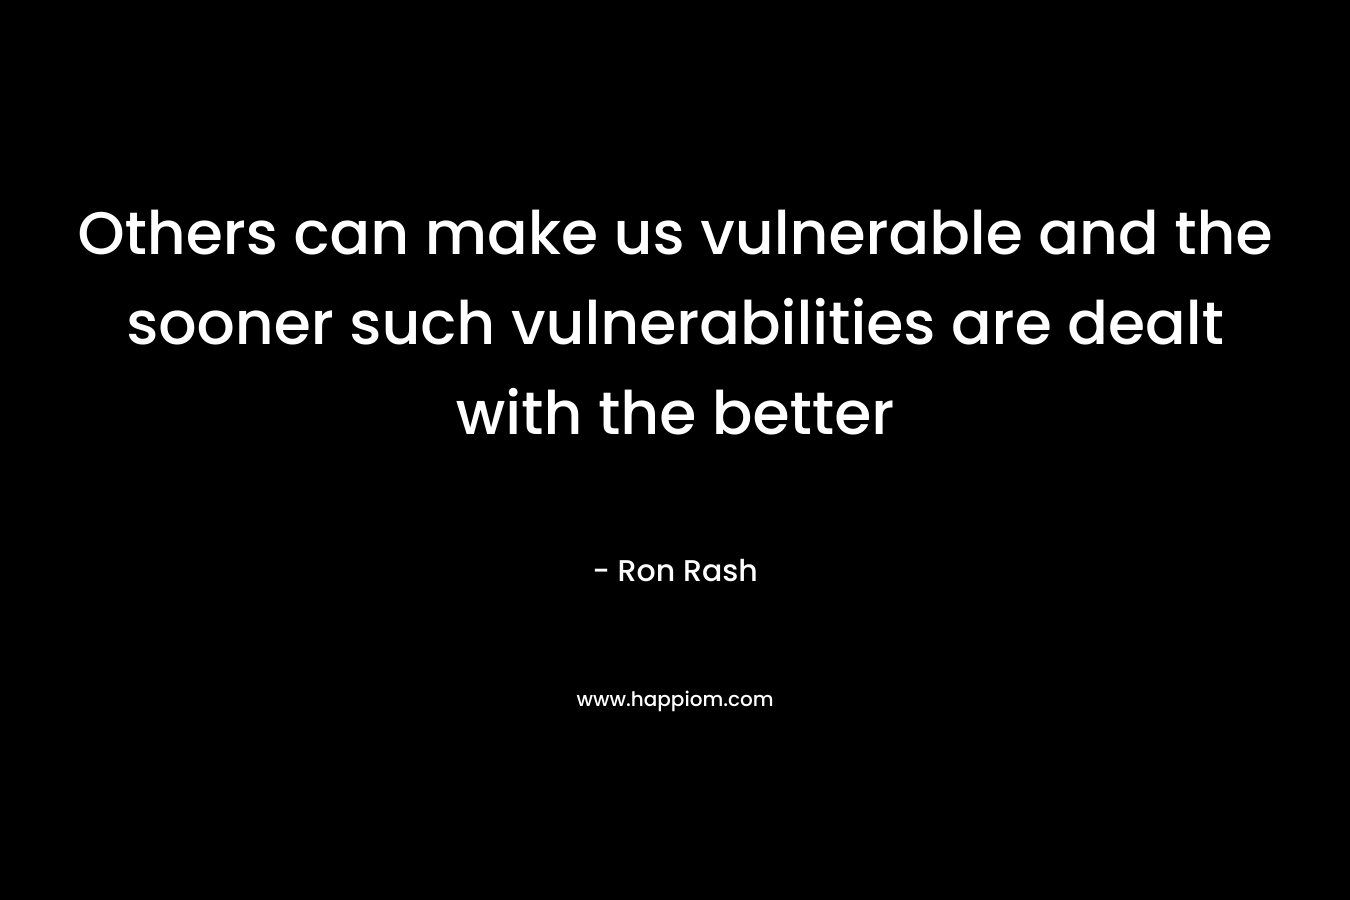 Others can make us vulnerable and the sooner such vulnerabilities are dealt with the better – Ron Rash